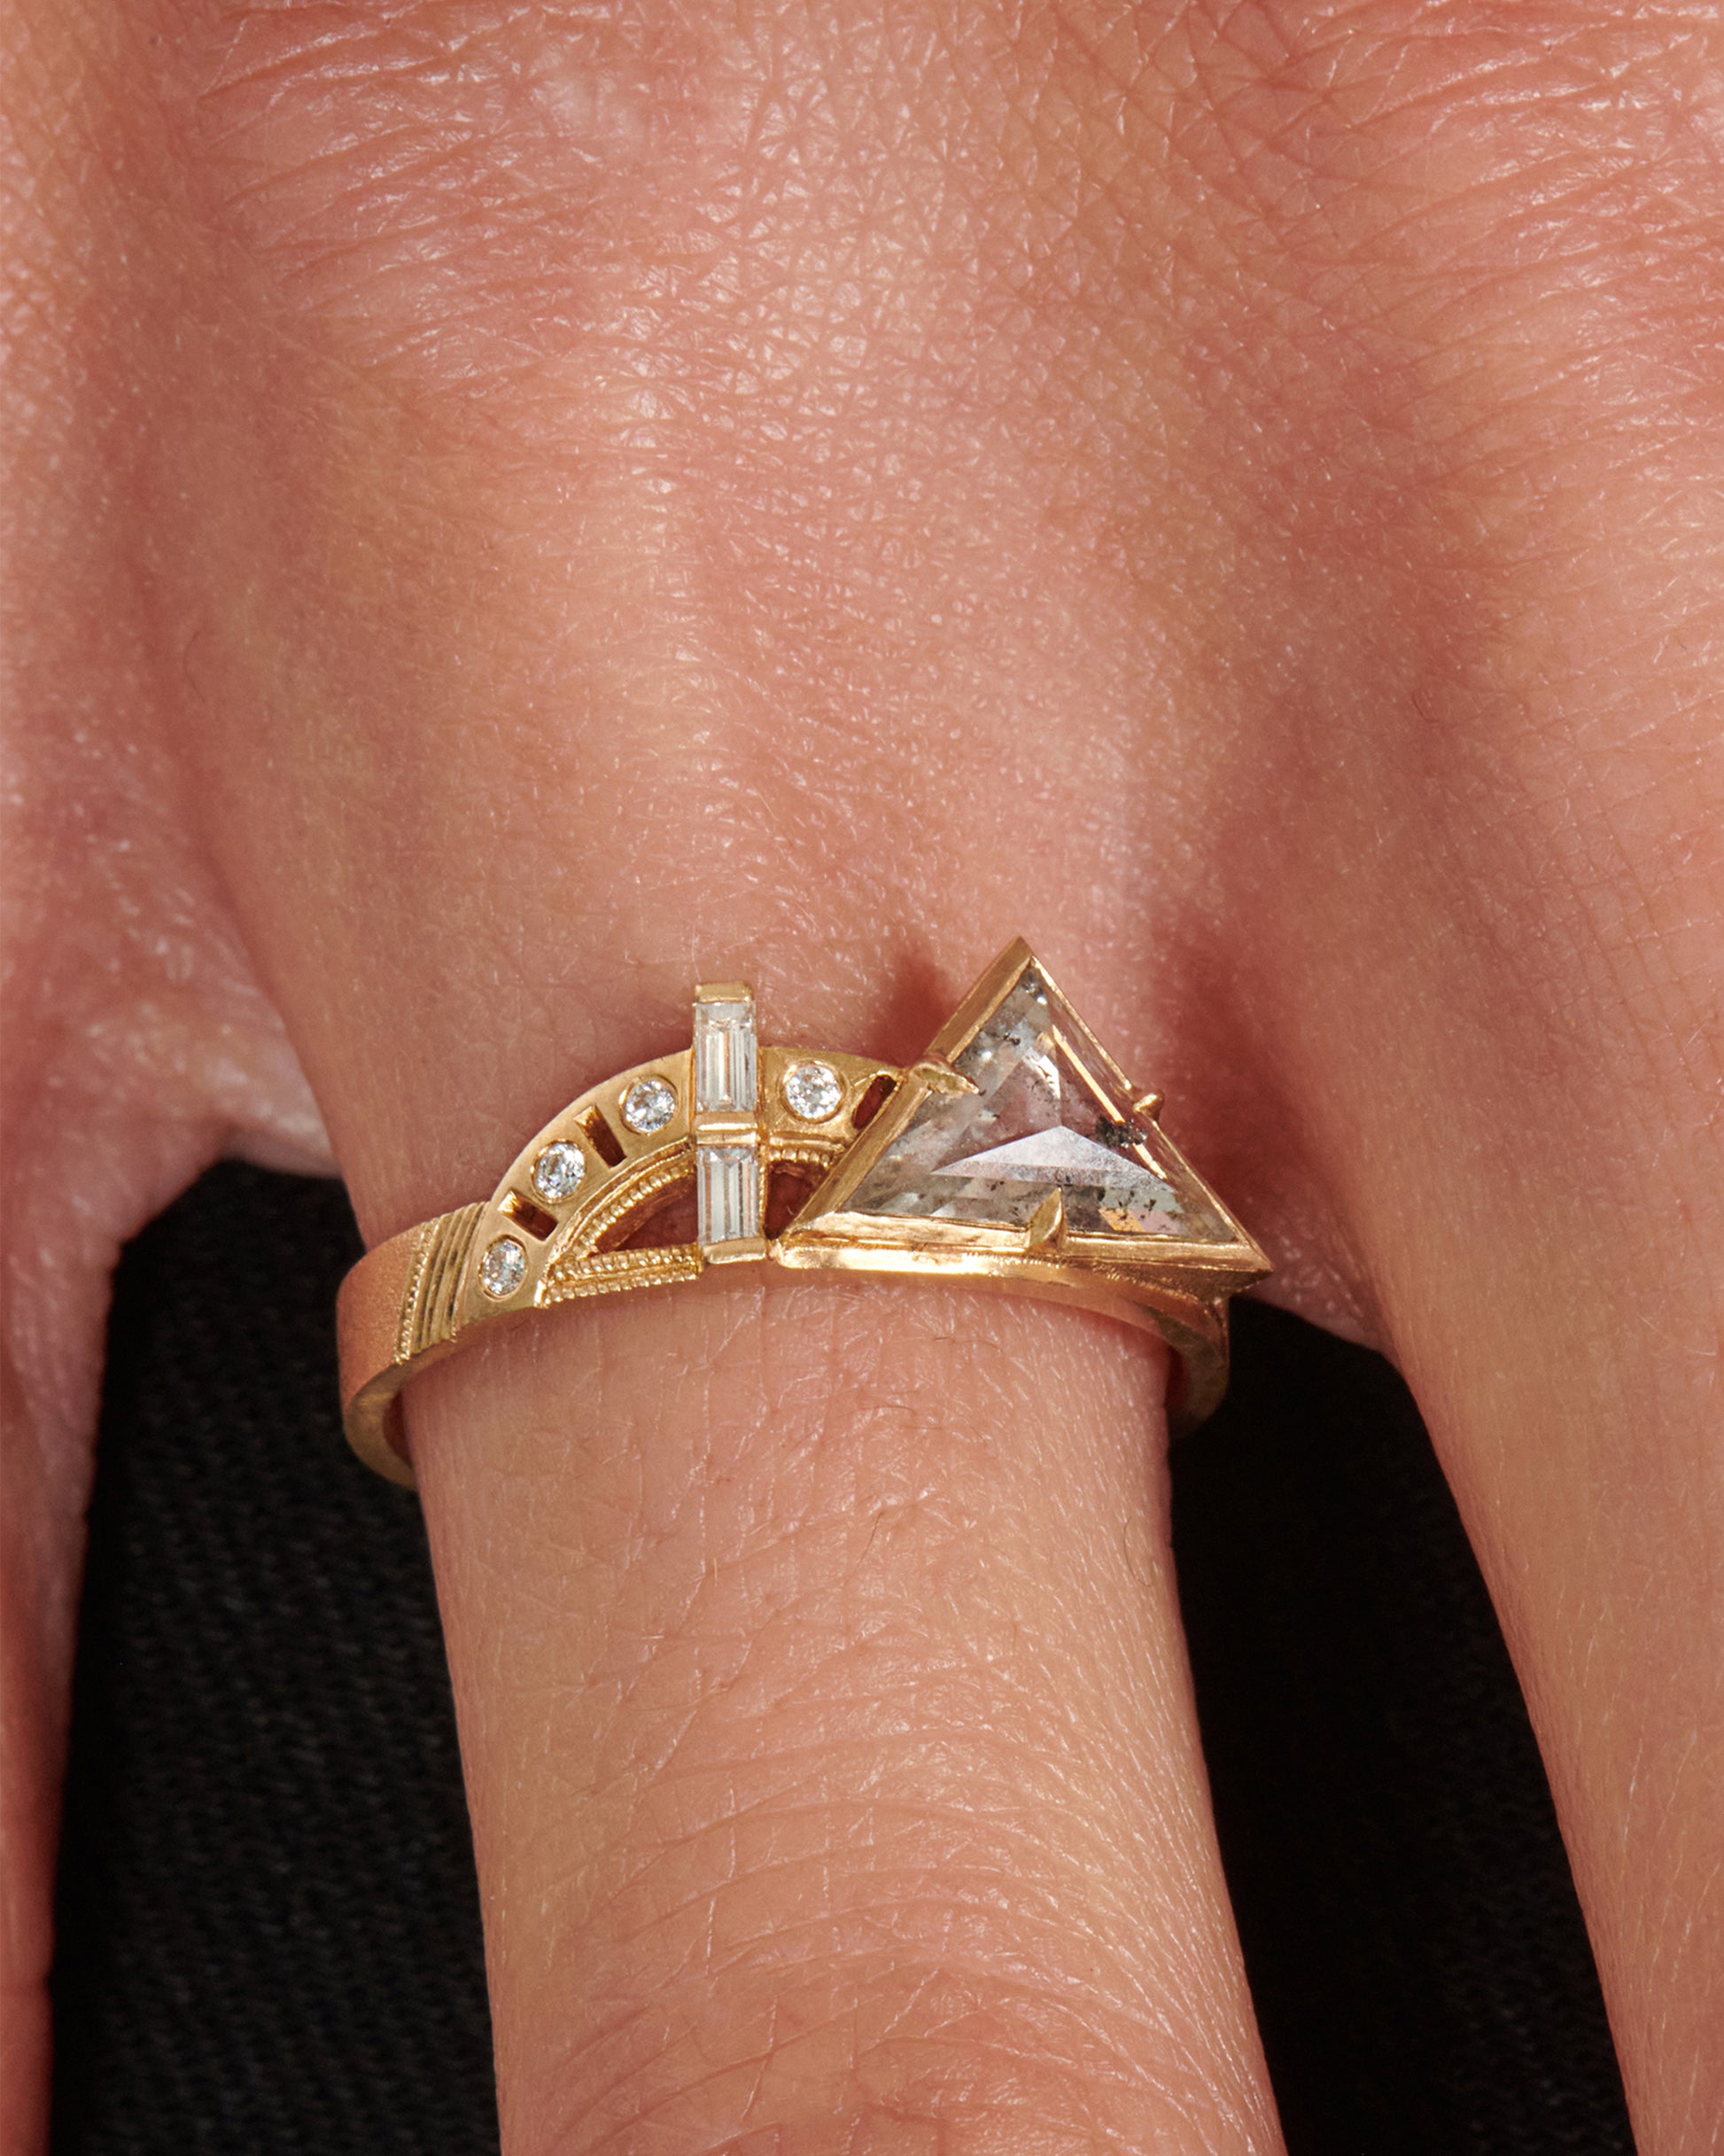 A wide flat band with a salt & pepper trillion cut diamond, gold arches, and round and baguette diamonds at its center.